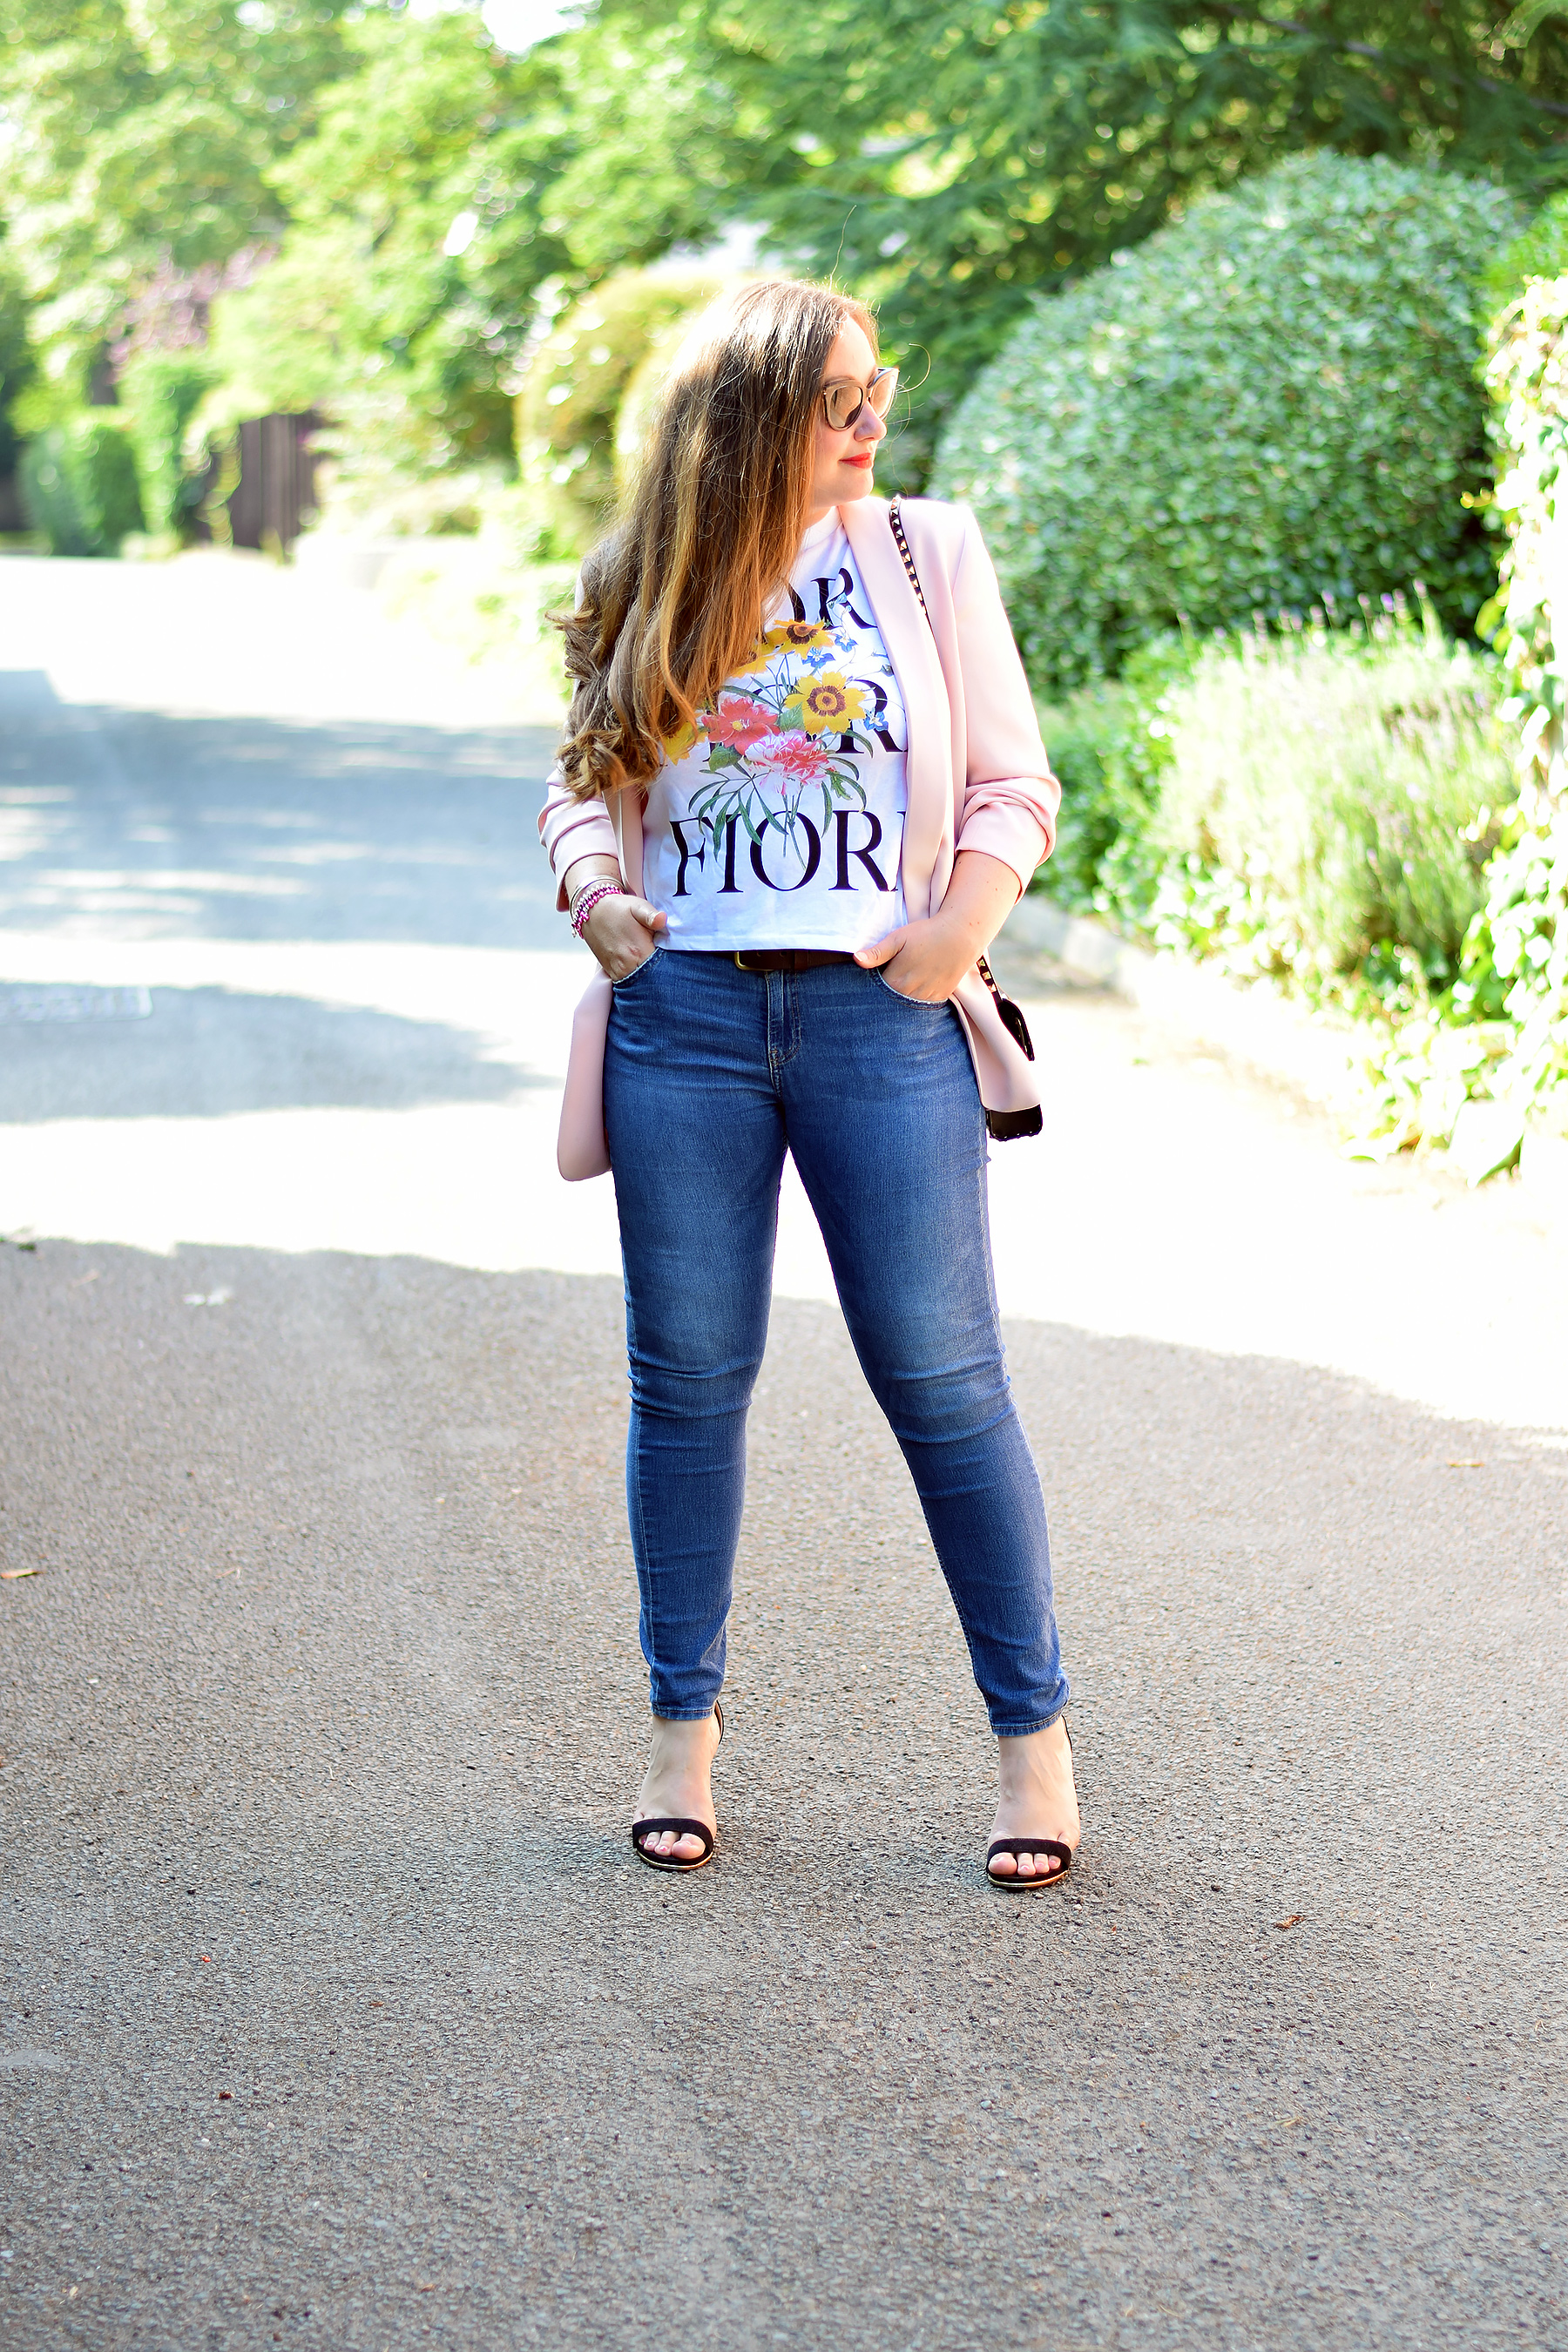 Gemma from Jacquard Flower Blog wearing Zara Flower printed tee and pink blazer with jeans and heels